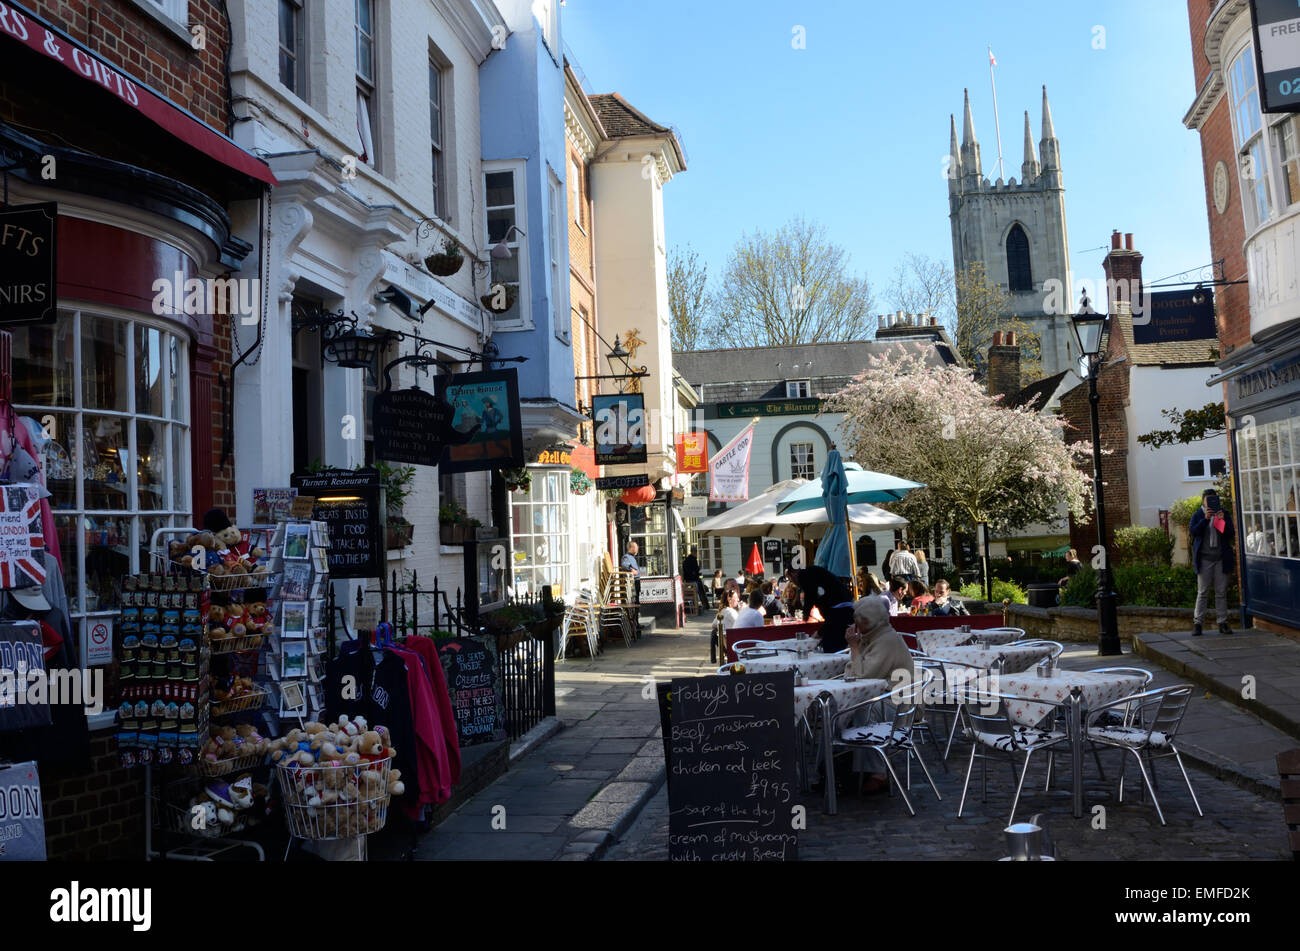 A view down Church Street in Windsor. the street has lots of interesting tourist shops and cafés. Stock Photo